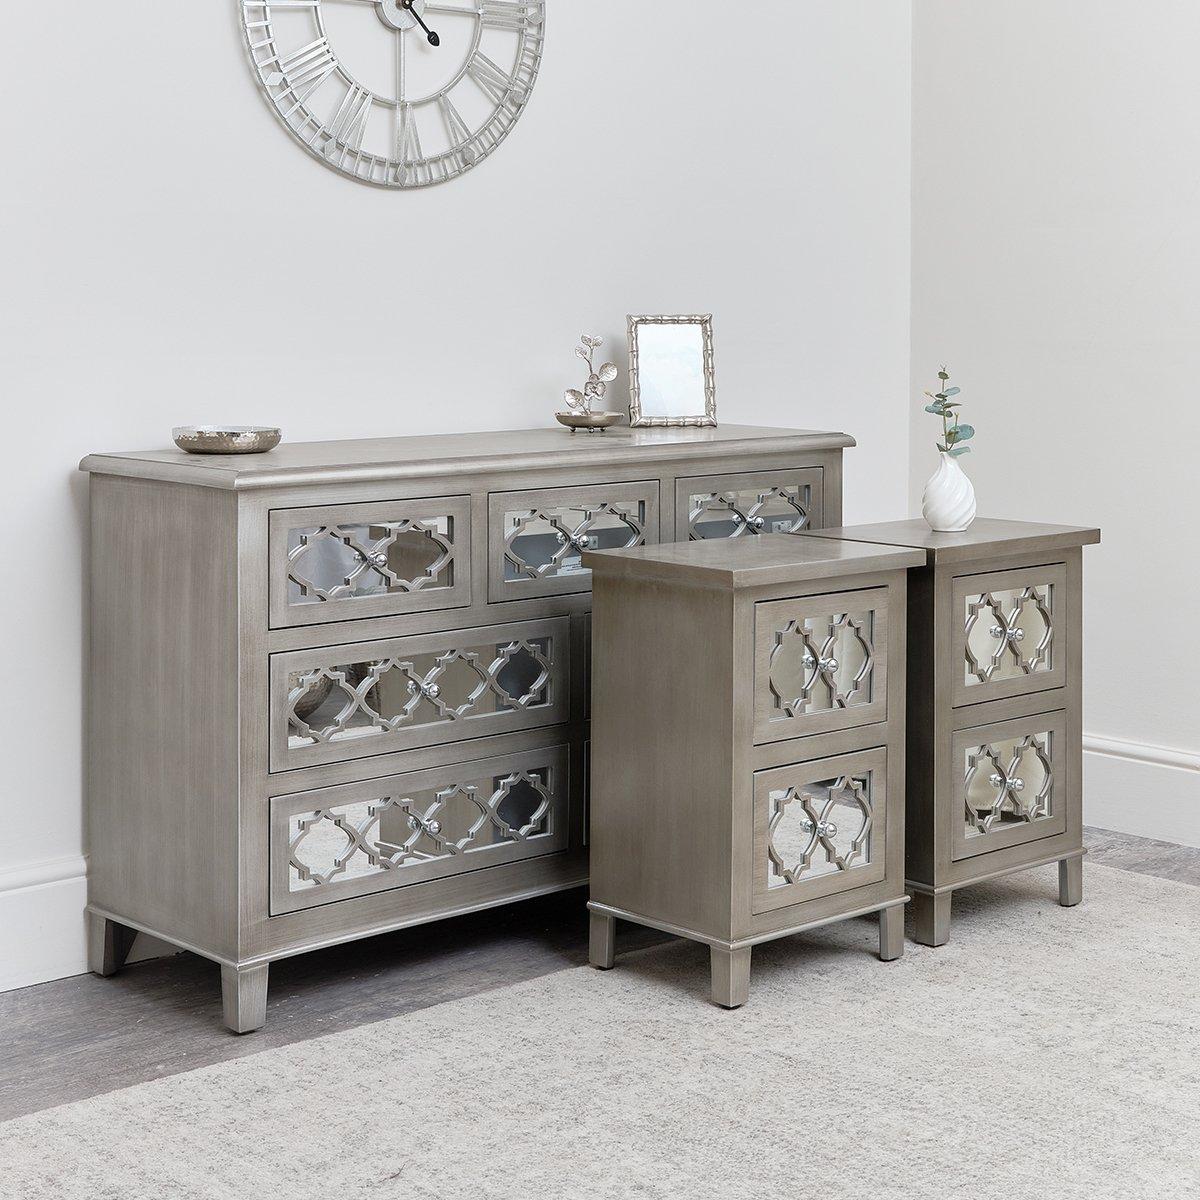 7 Drawer Chest Of Drawers & Pair Of 2 Drawer Bedsides - Sabrina Silver Range